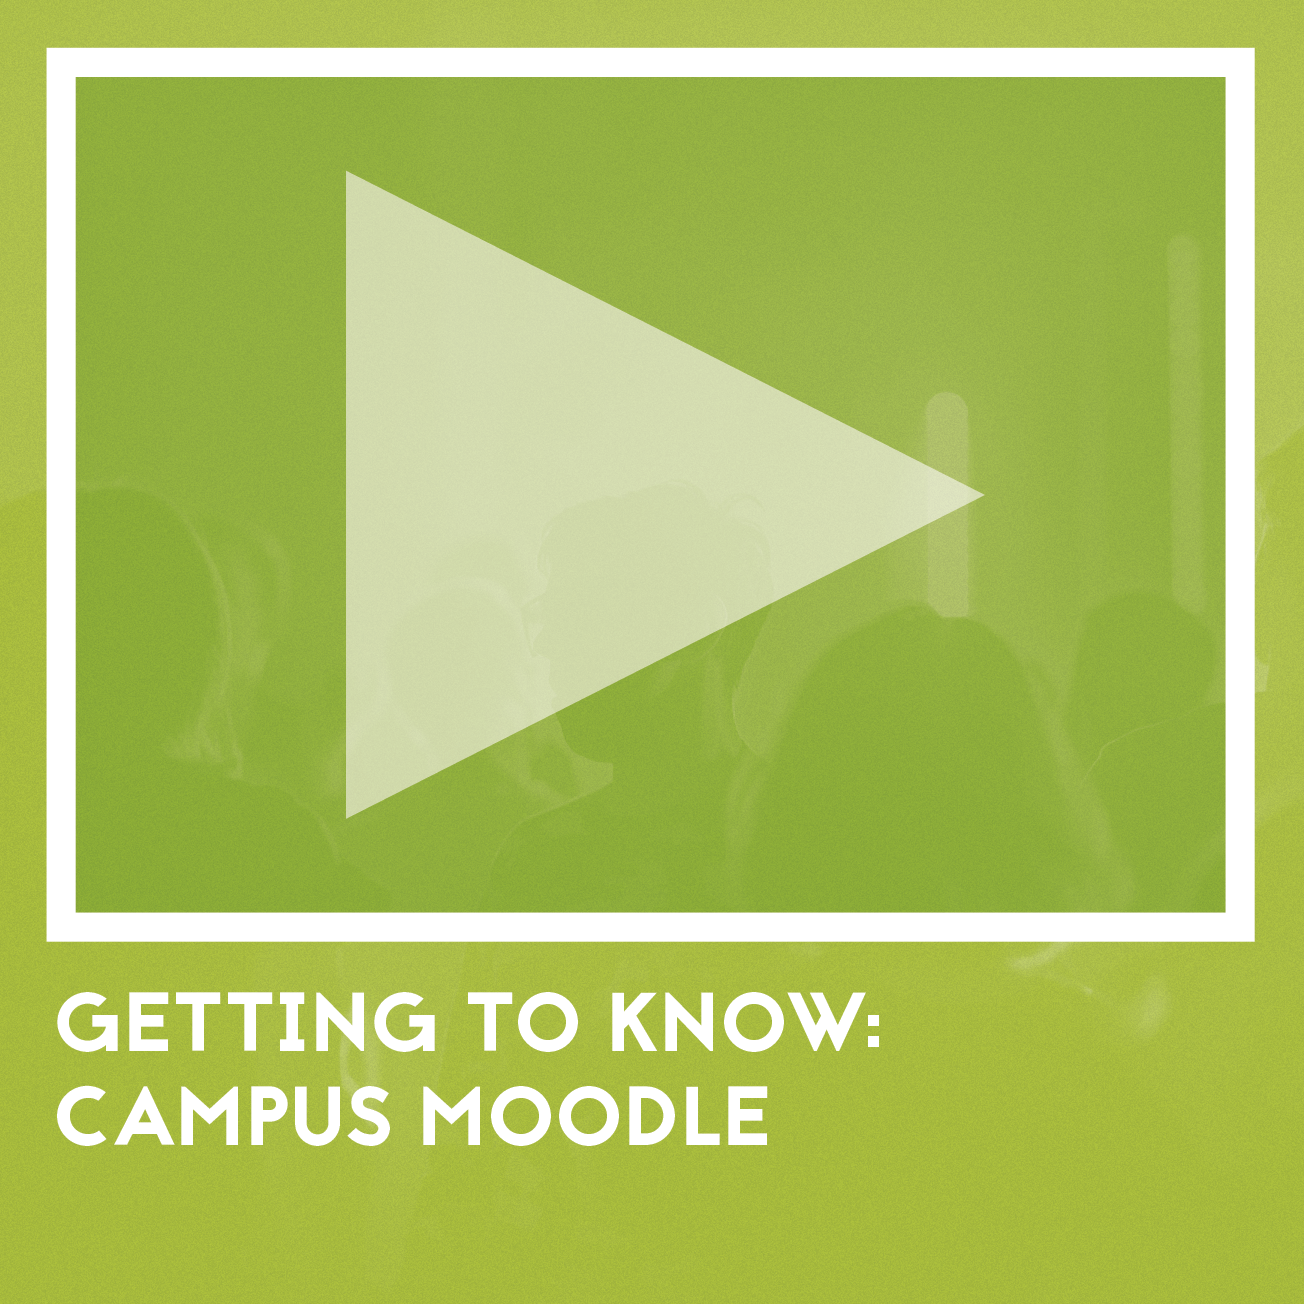 Video Available Soon: Getting to know campus moodle